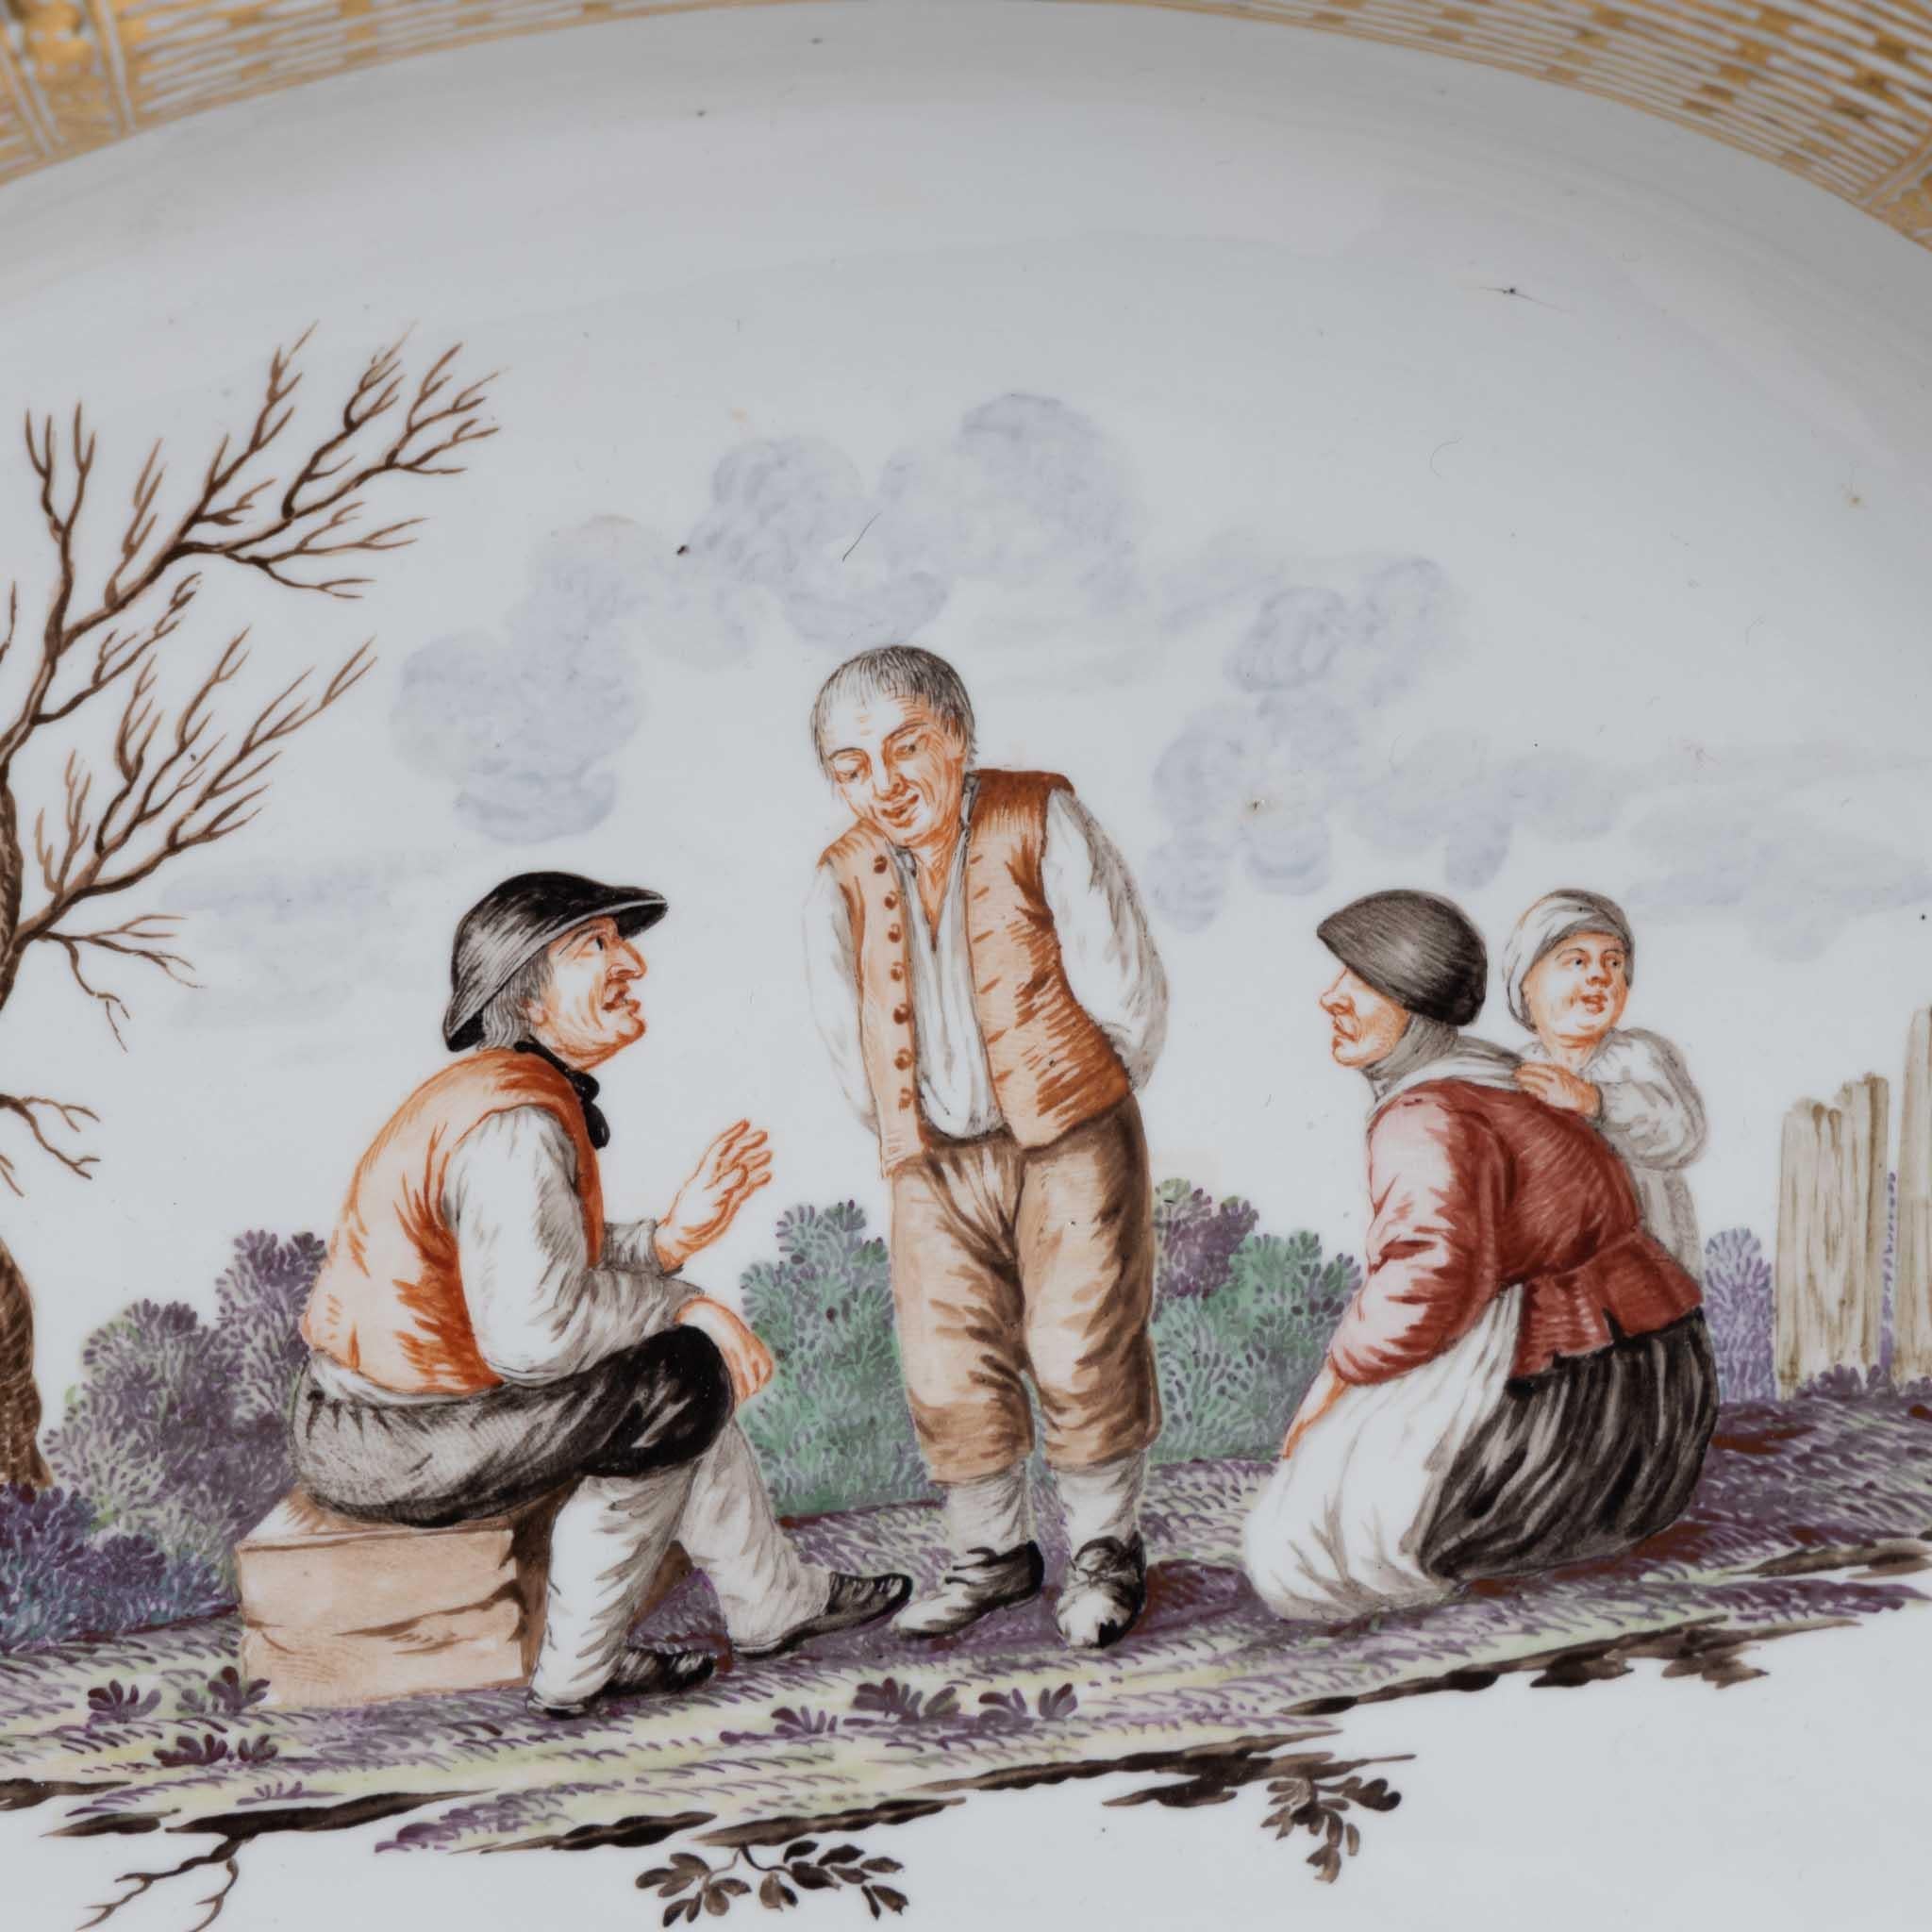 Oval bowl with peasant scene, Nymphenburg, c. 1775, pressed mark Rautenschild, incised 6, painting attributed to Joseph Kaltner.